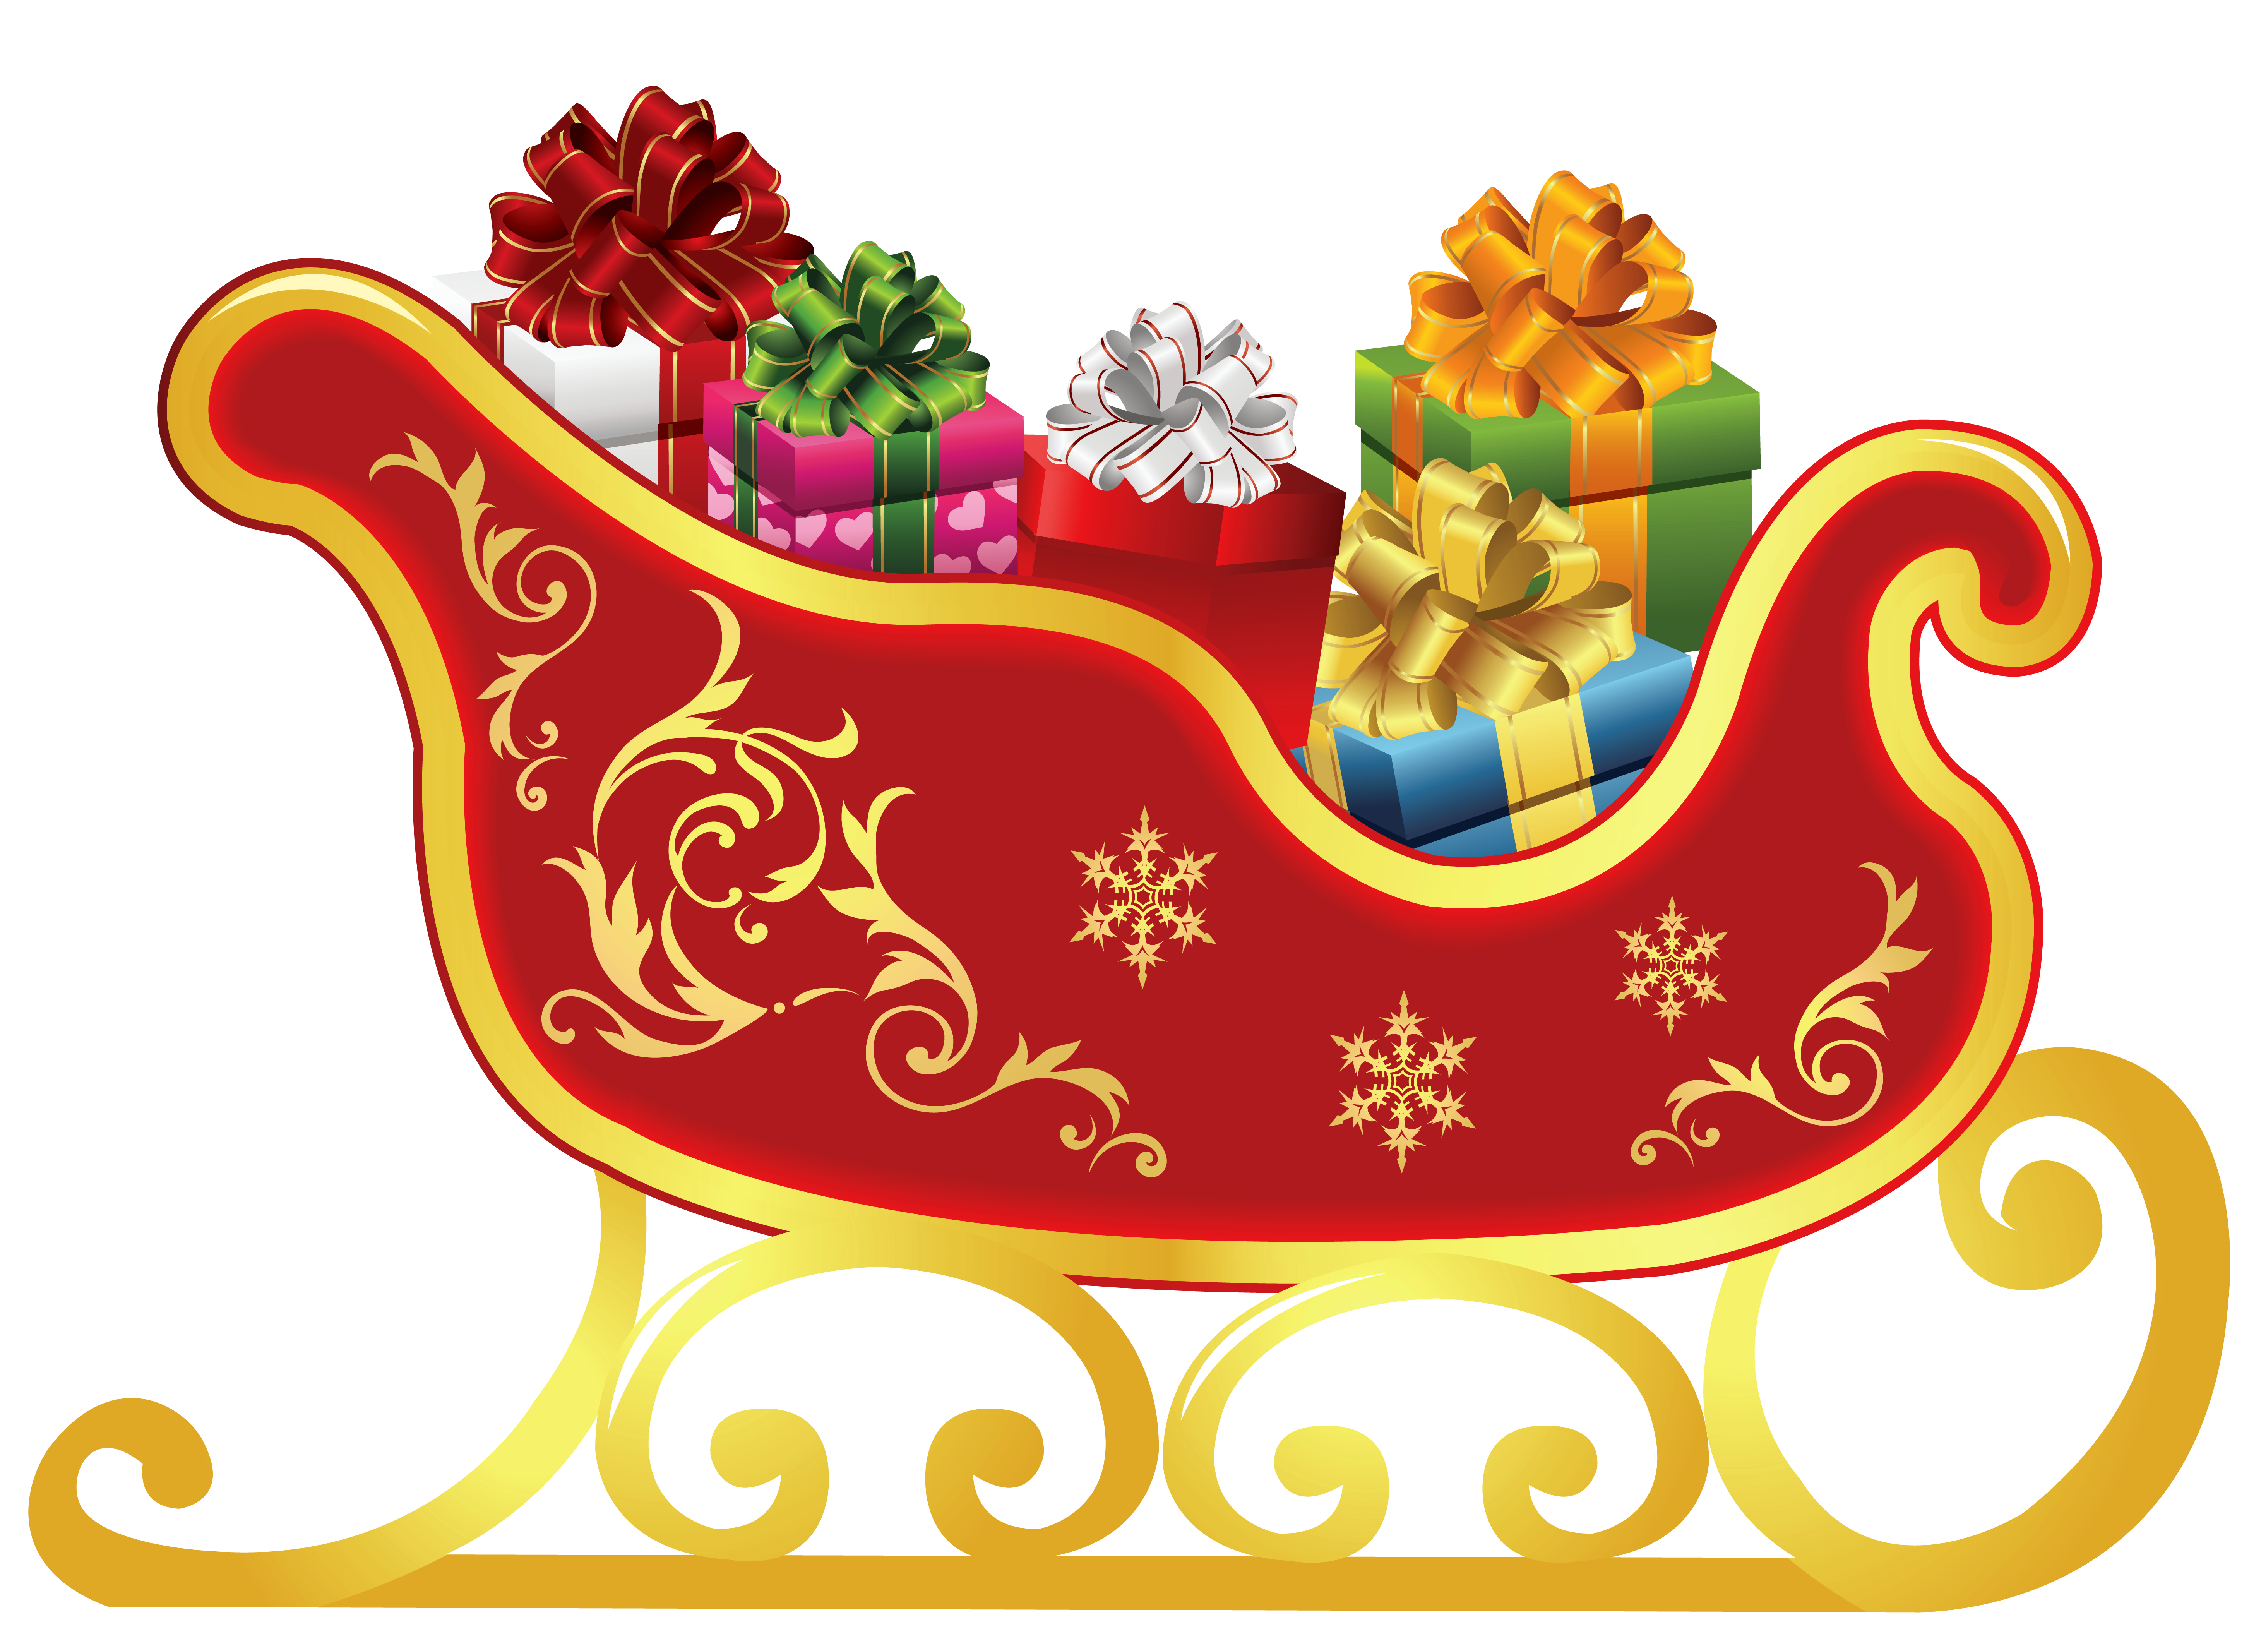 Sleigh clipart #2, Download drawings